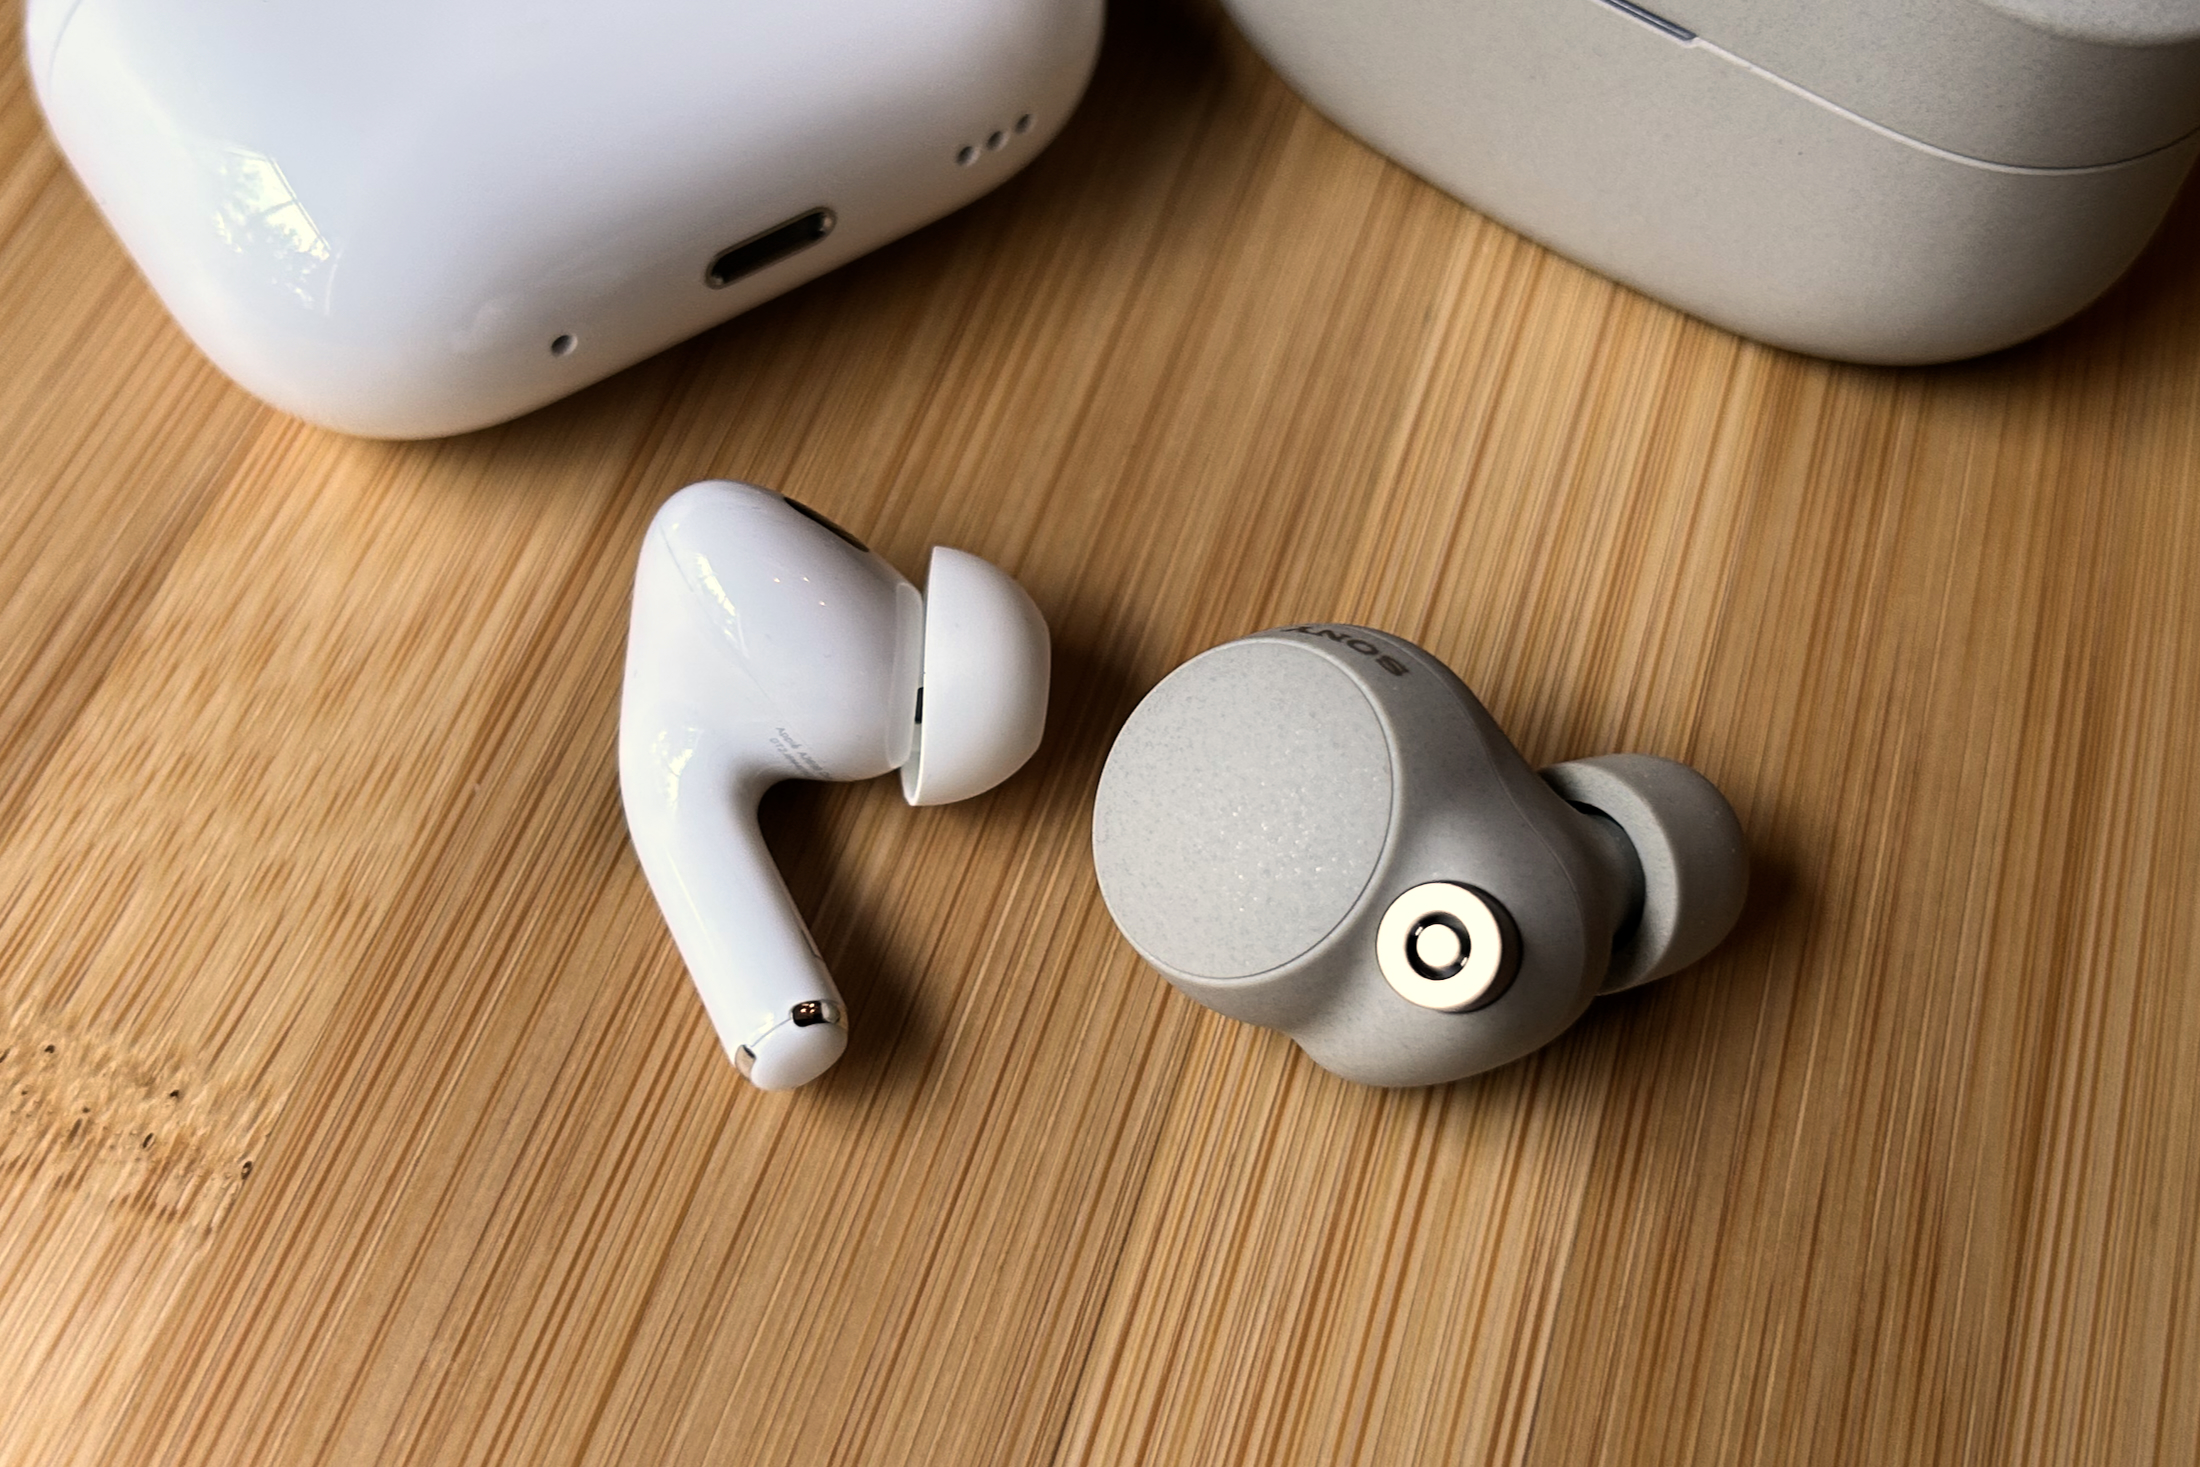 AirPods Pro 2 vs AirPods 3: which are better?